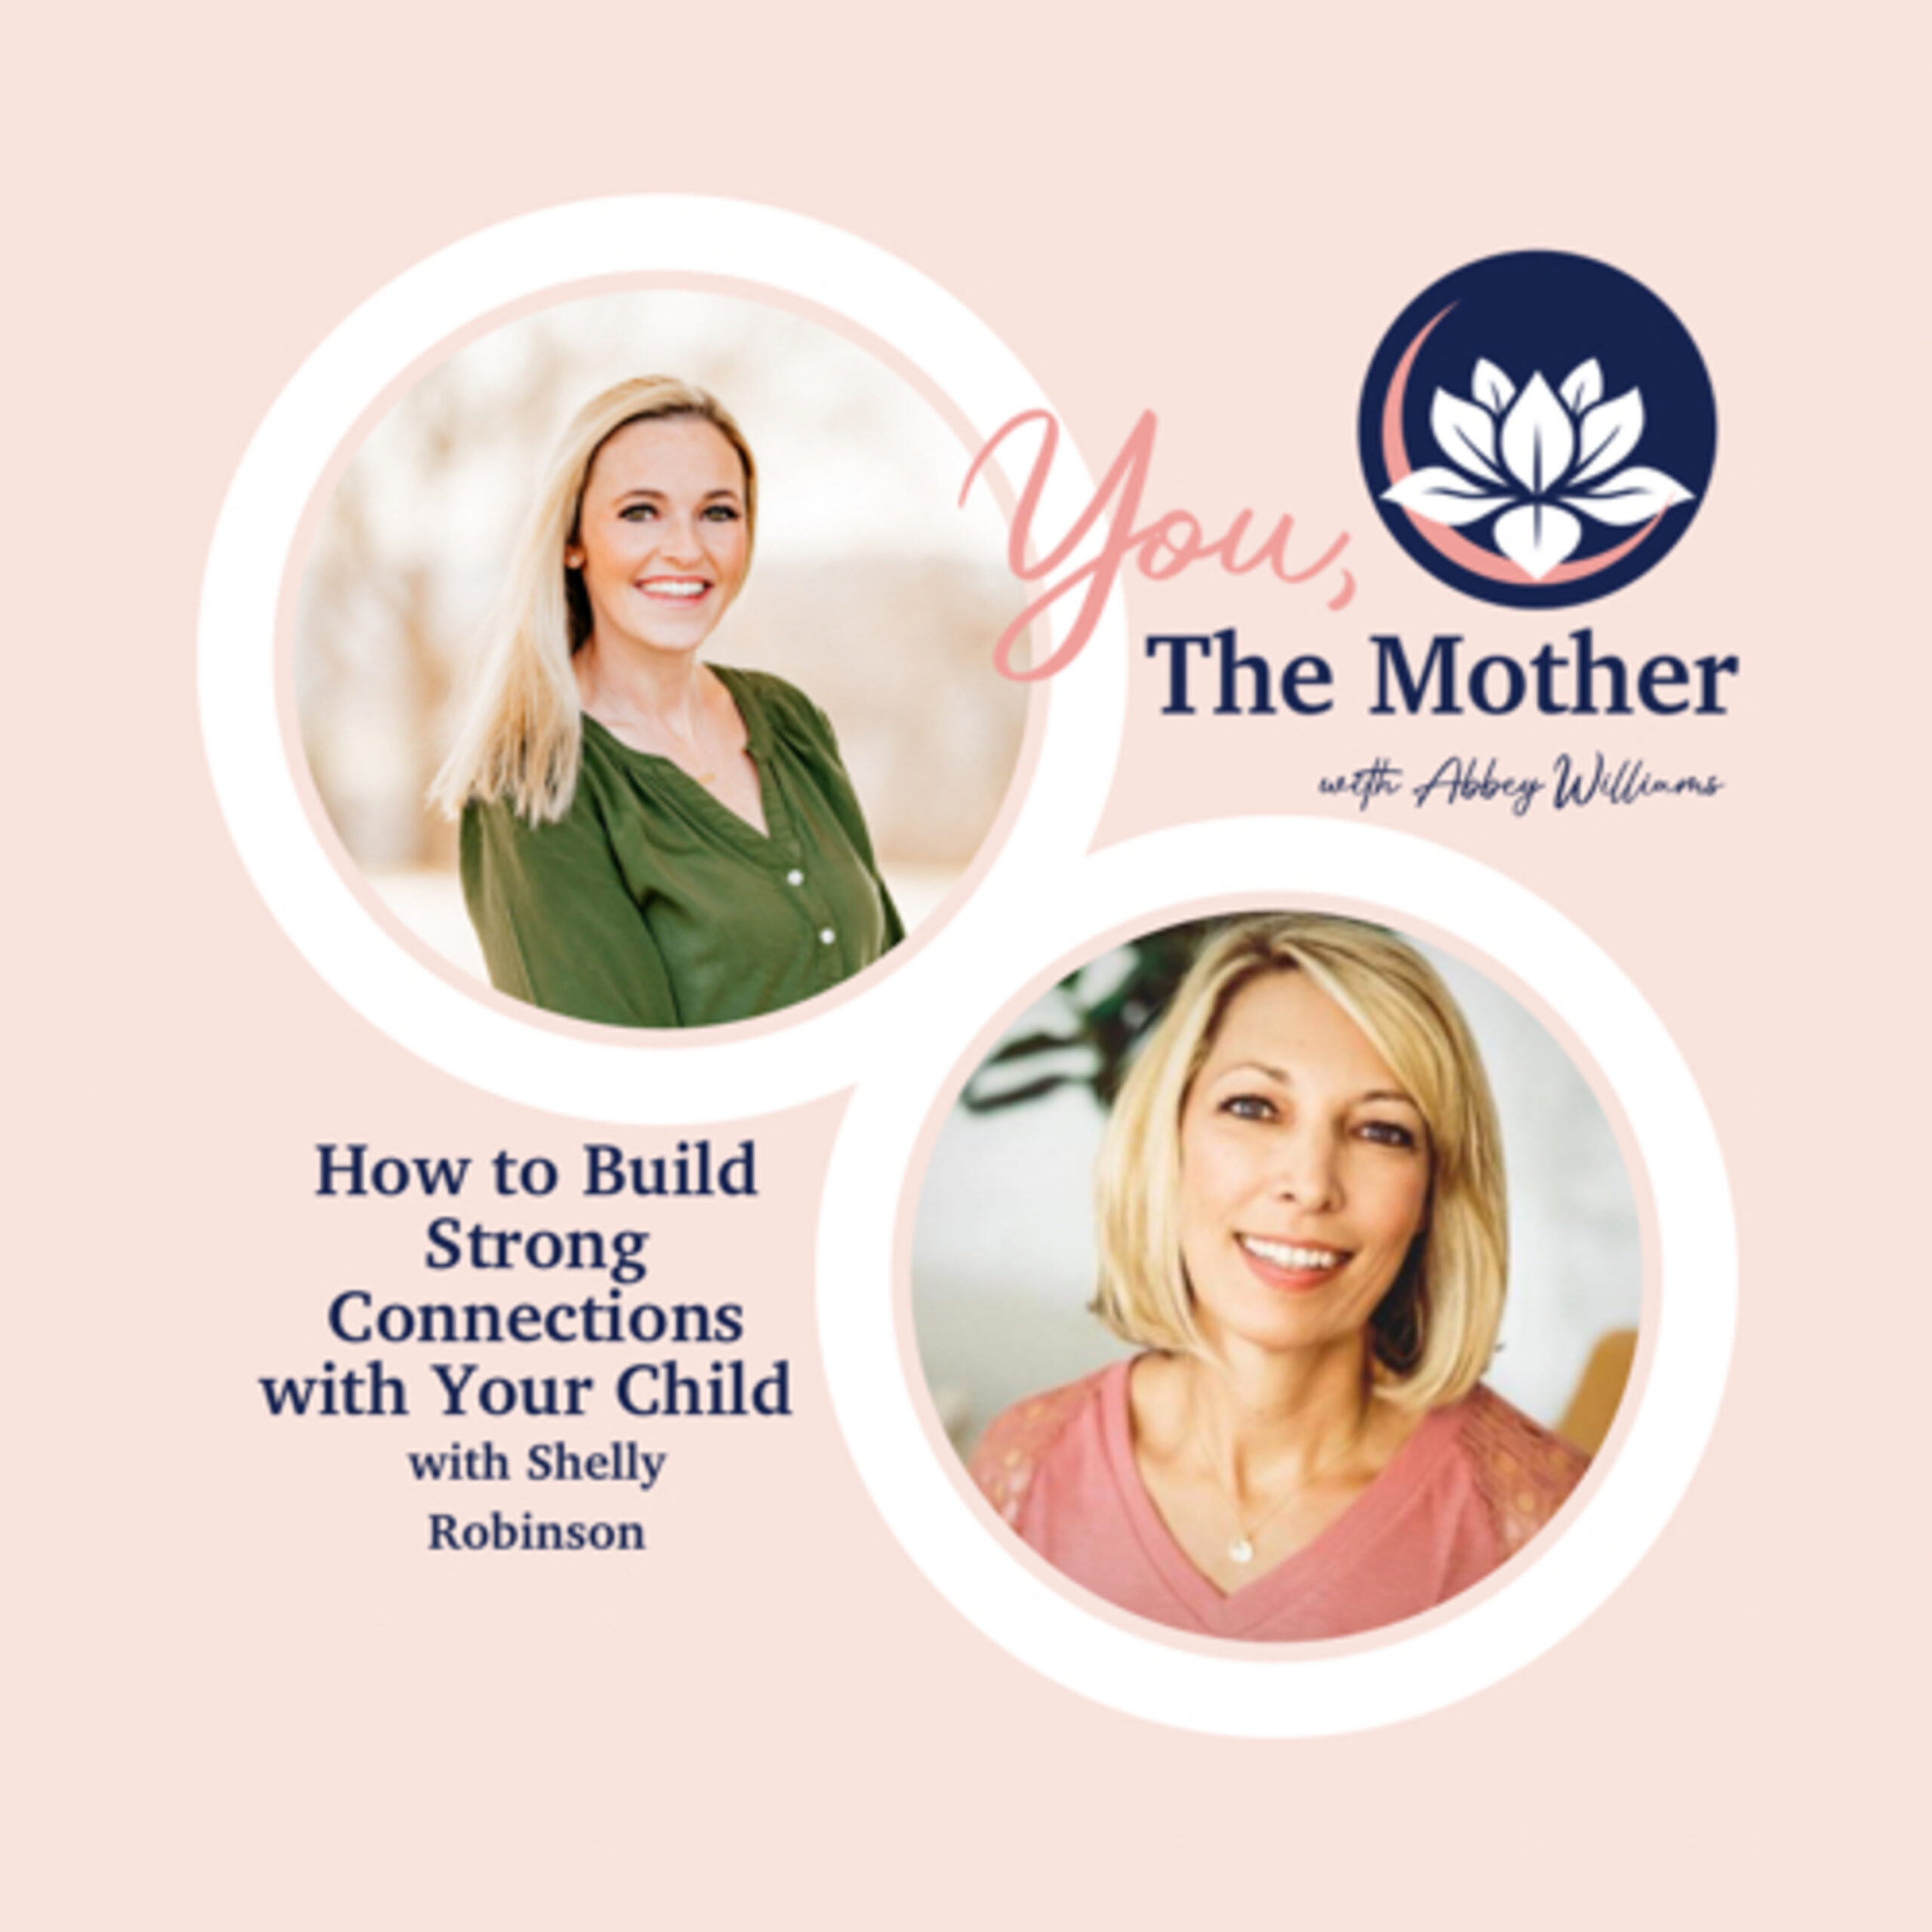 How to Build Strong Connections with Your Child with Shelly Robinson